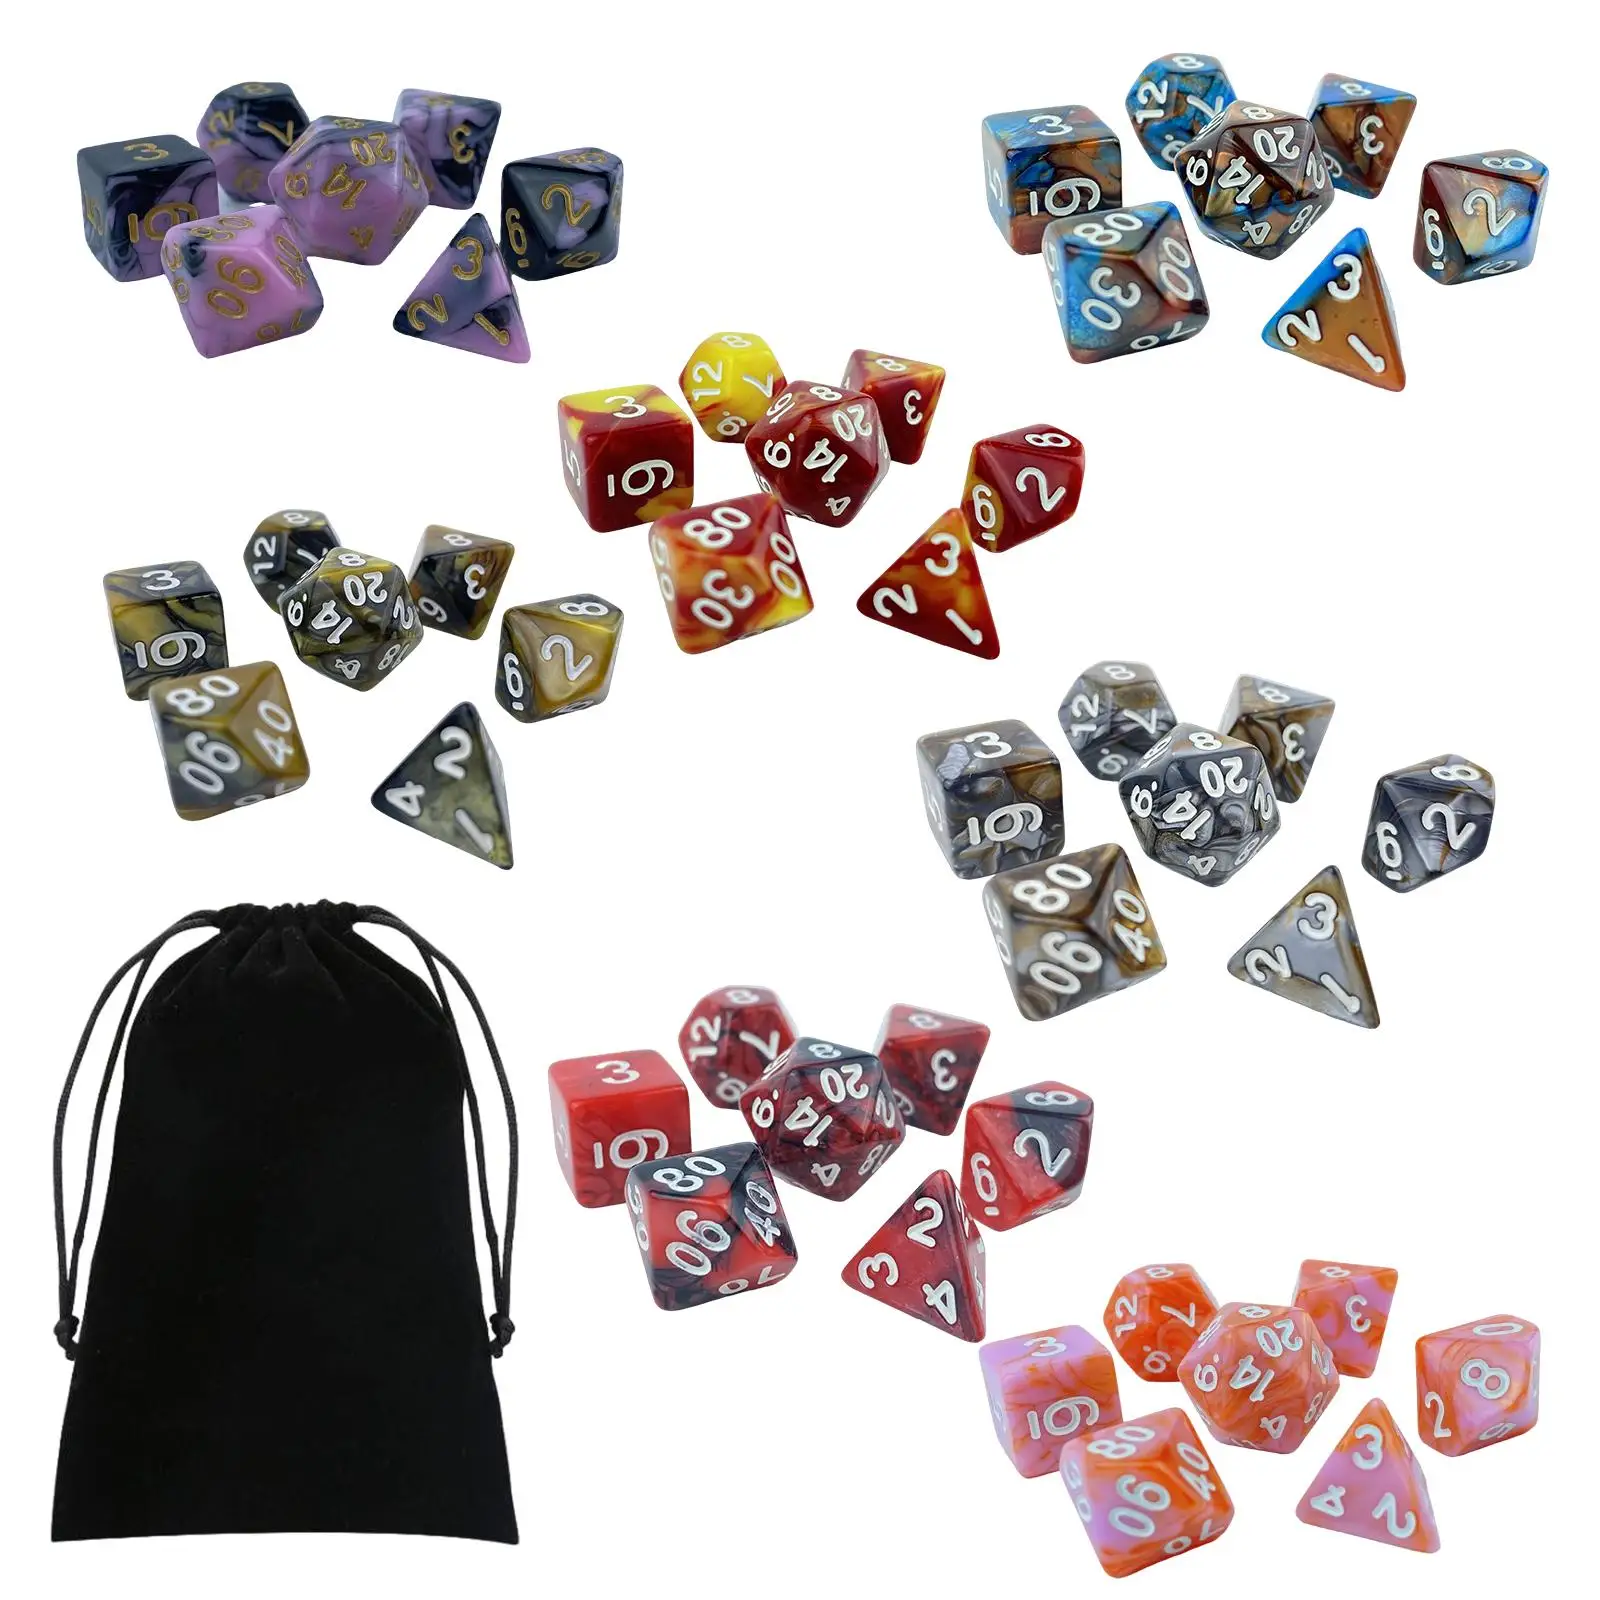 49Pcs Engraved Polyhedral Dices Set with Storage Bag Entertainment Toy Game Dices for Roll Playing Games Table Games Parties KTV